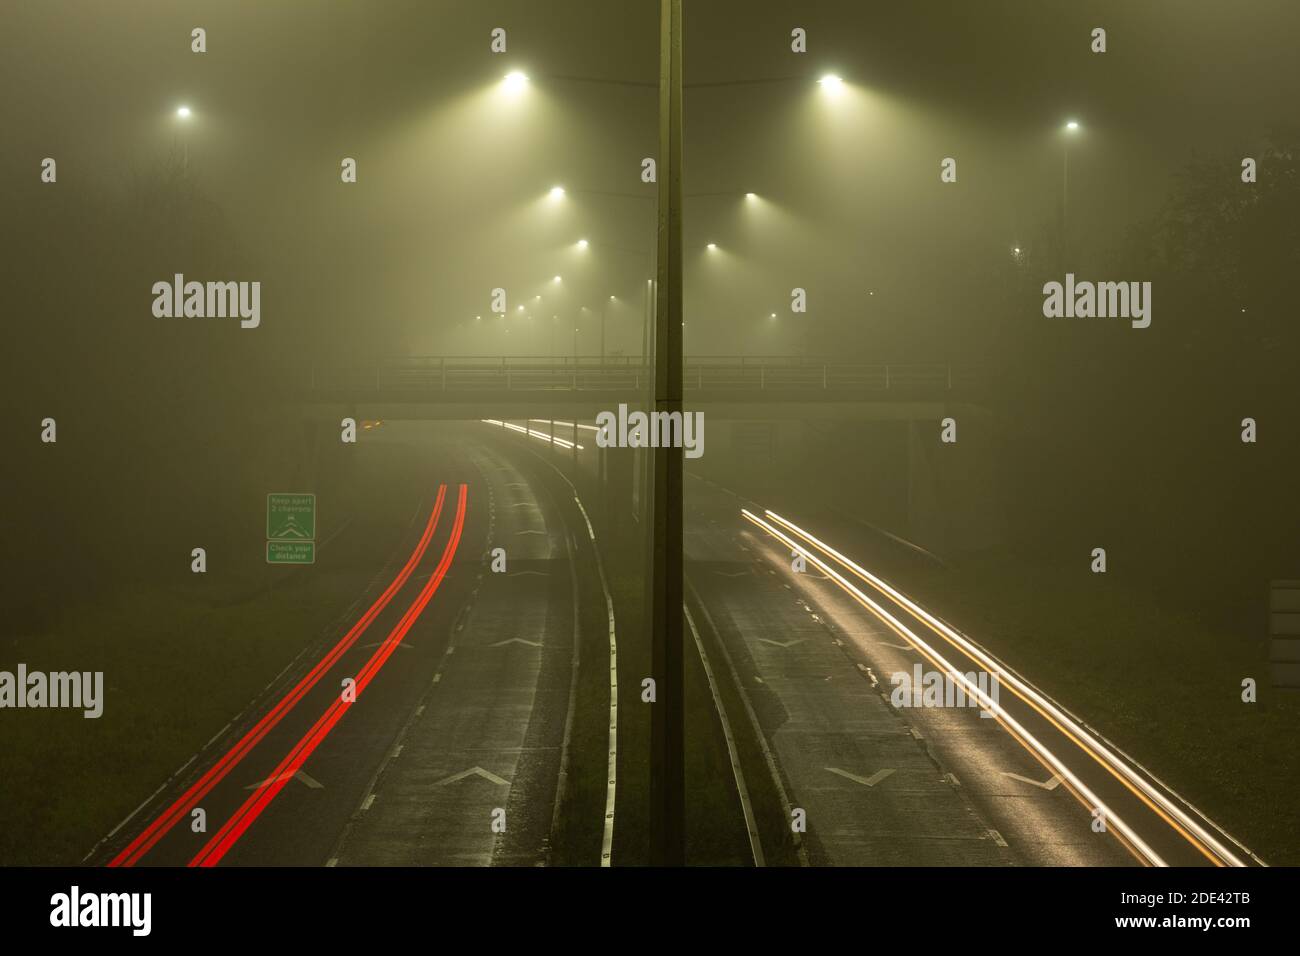 Stirchley, Telford, United Kingdom. 28th November, 2020 Dangerous driving conditions affected by heavy fog in Shropshire  Credit: Eddie Cloud/Alamy Live News. Stock Photo